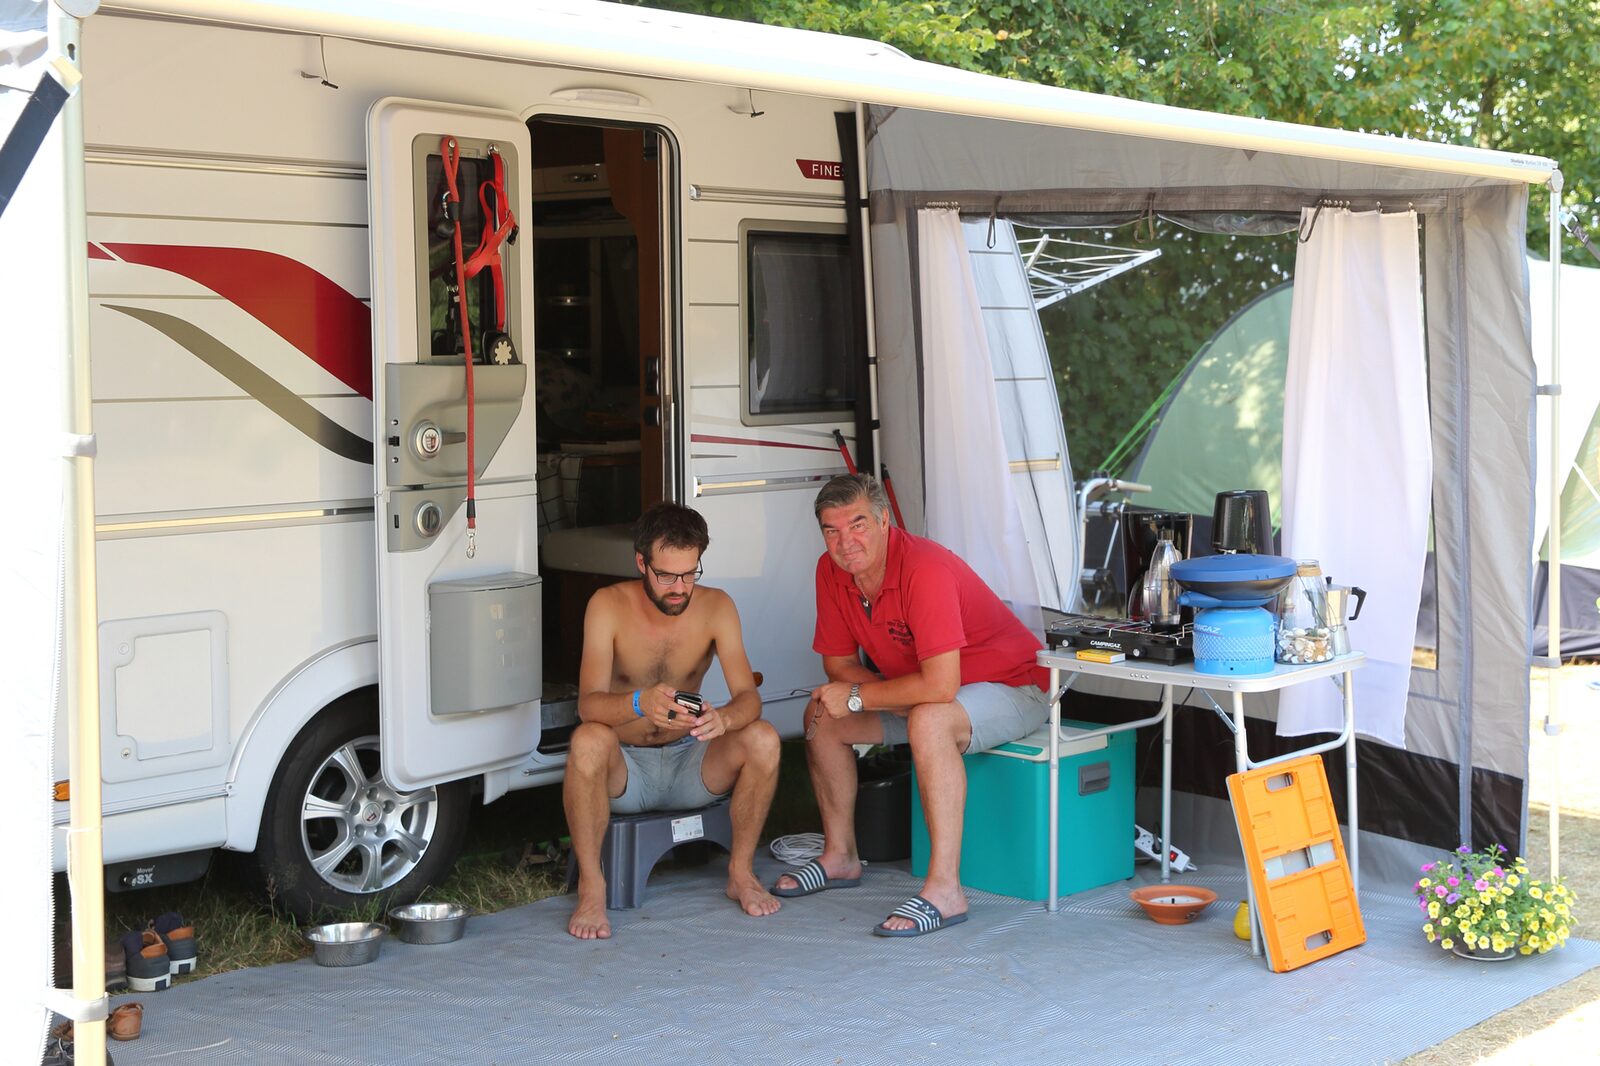 Camper pitch incl. 2 persons, excl. electricity